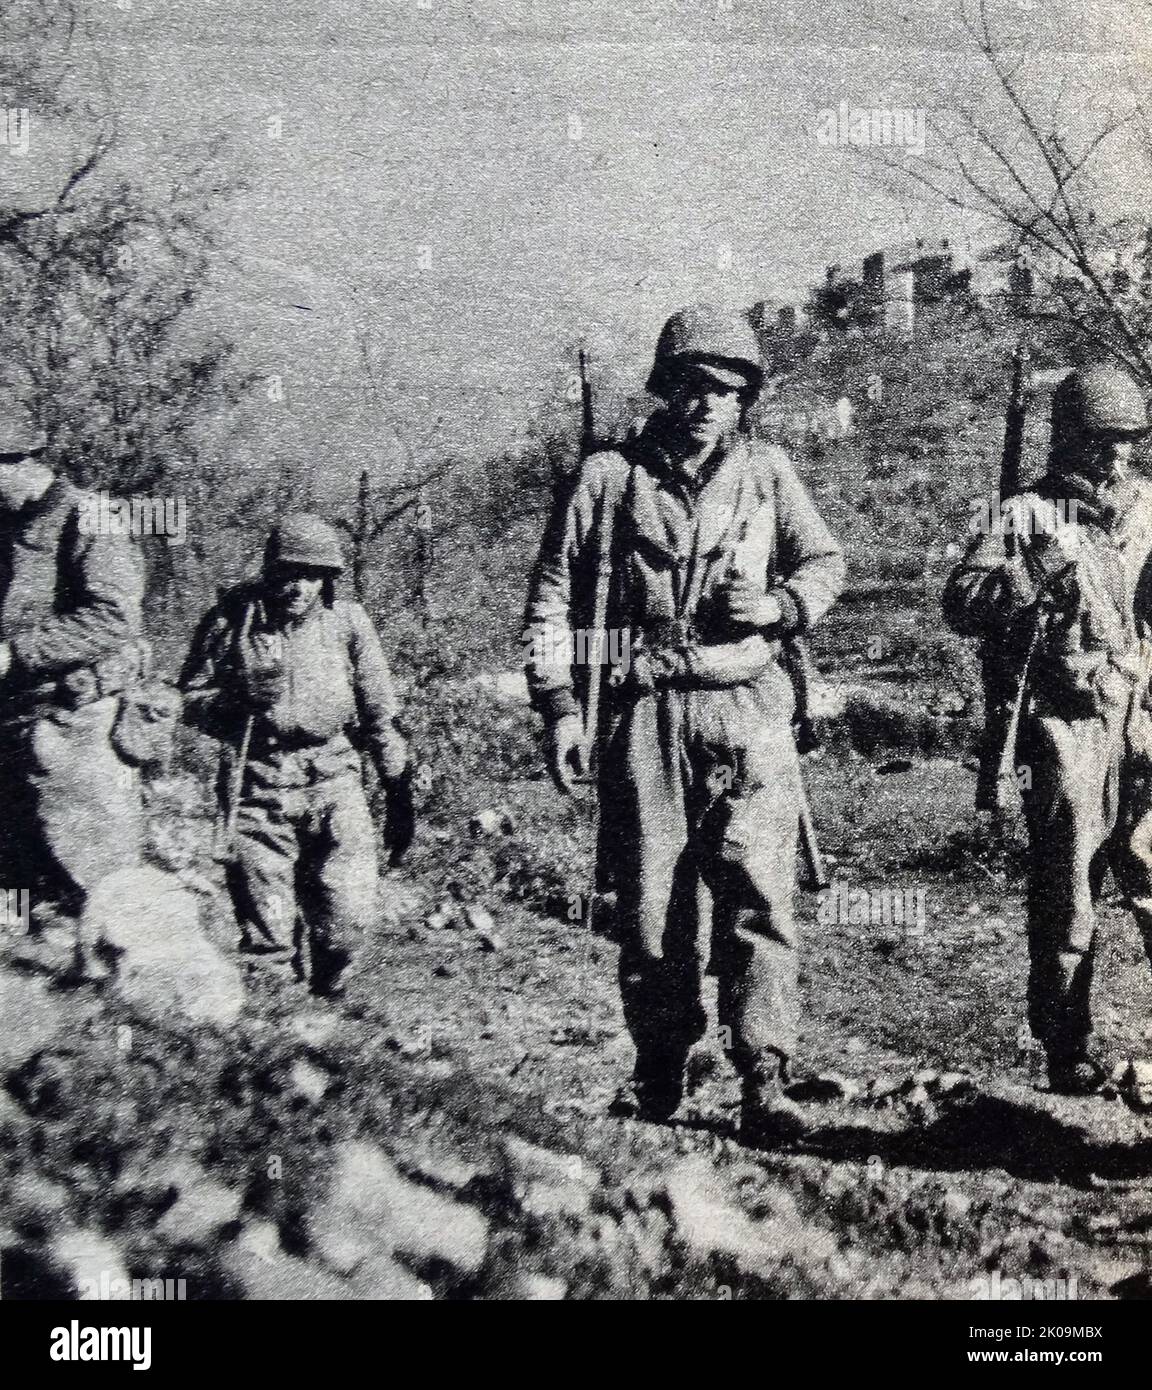 Soldiers get some respite from heavy shelling near Vittoria, Sicily, during World War II. Stock Photo